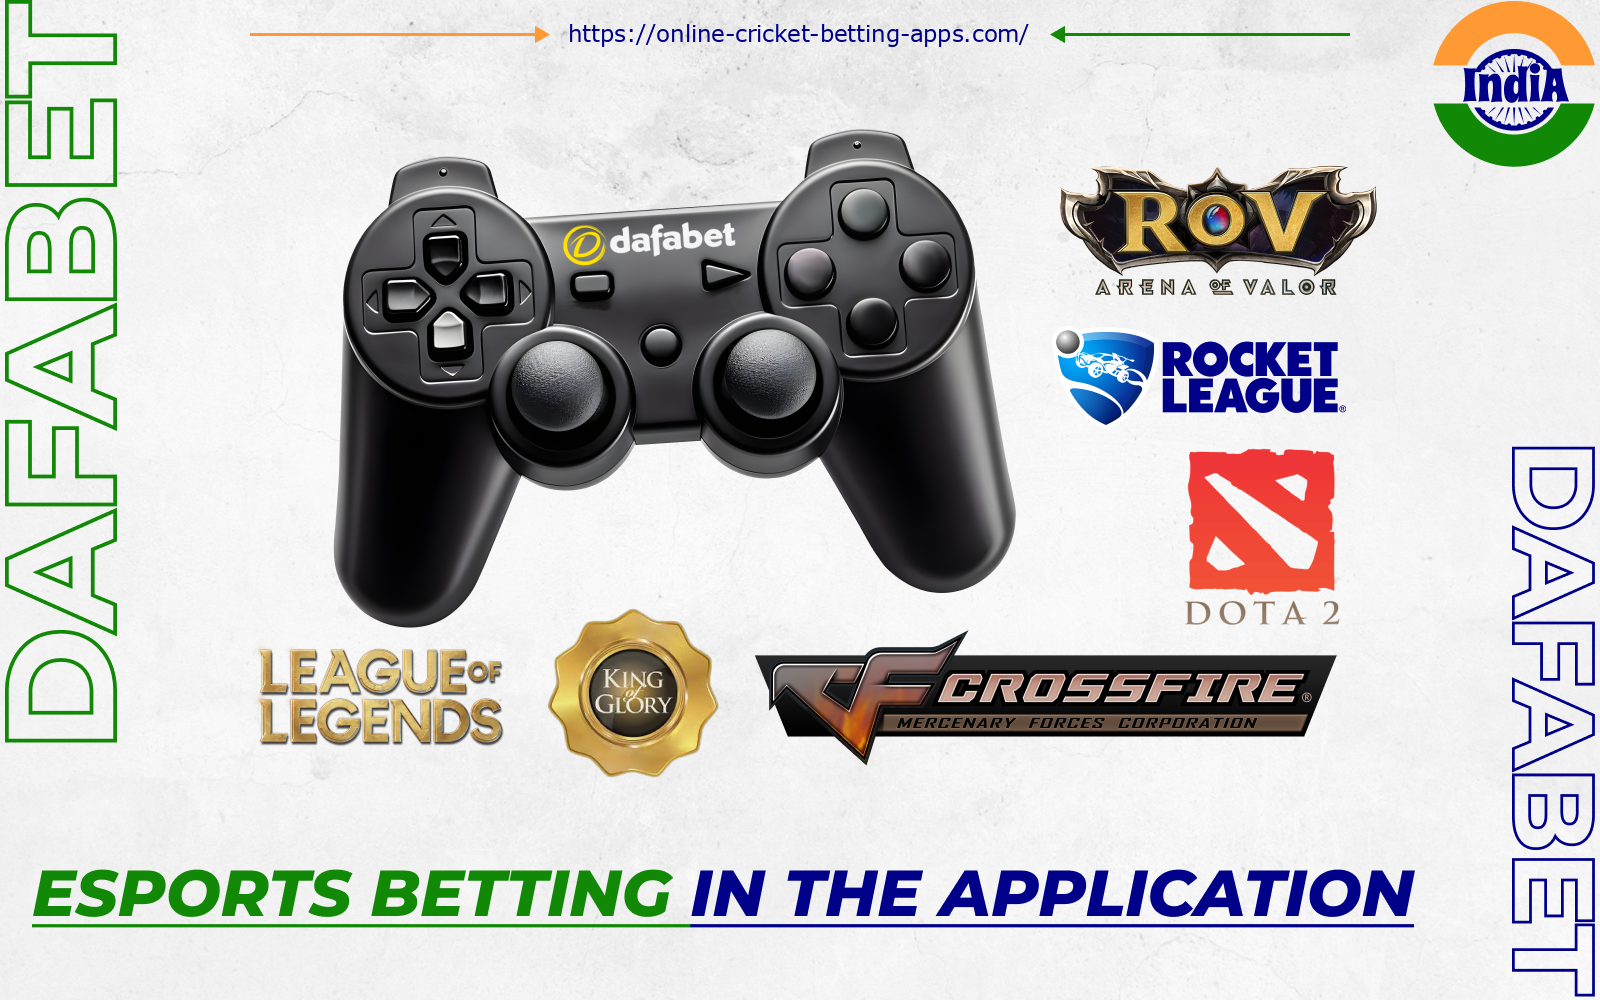 Users who download the Dafabet India app can bet on all popular cyber sports disciplines